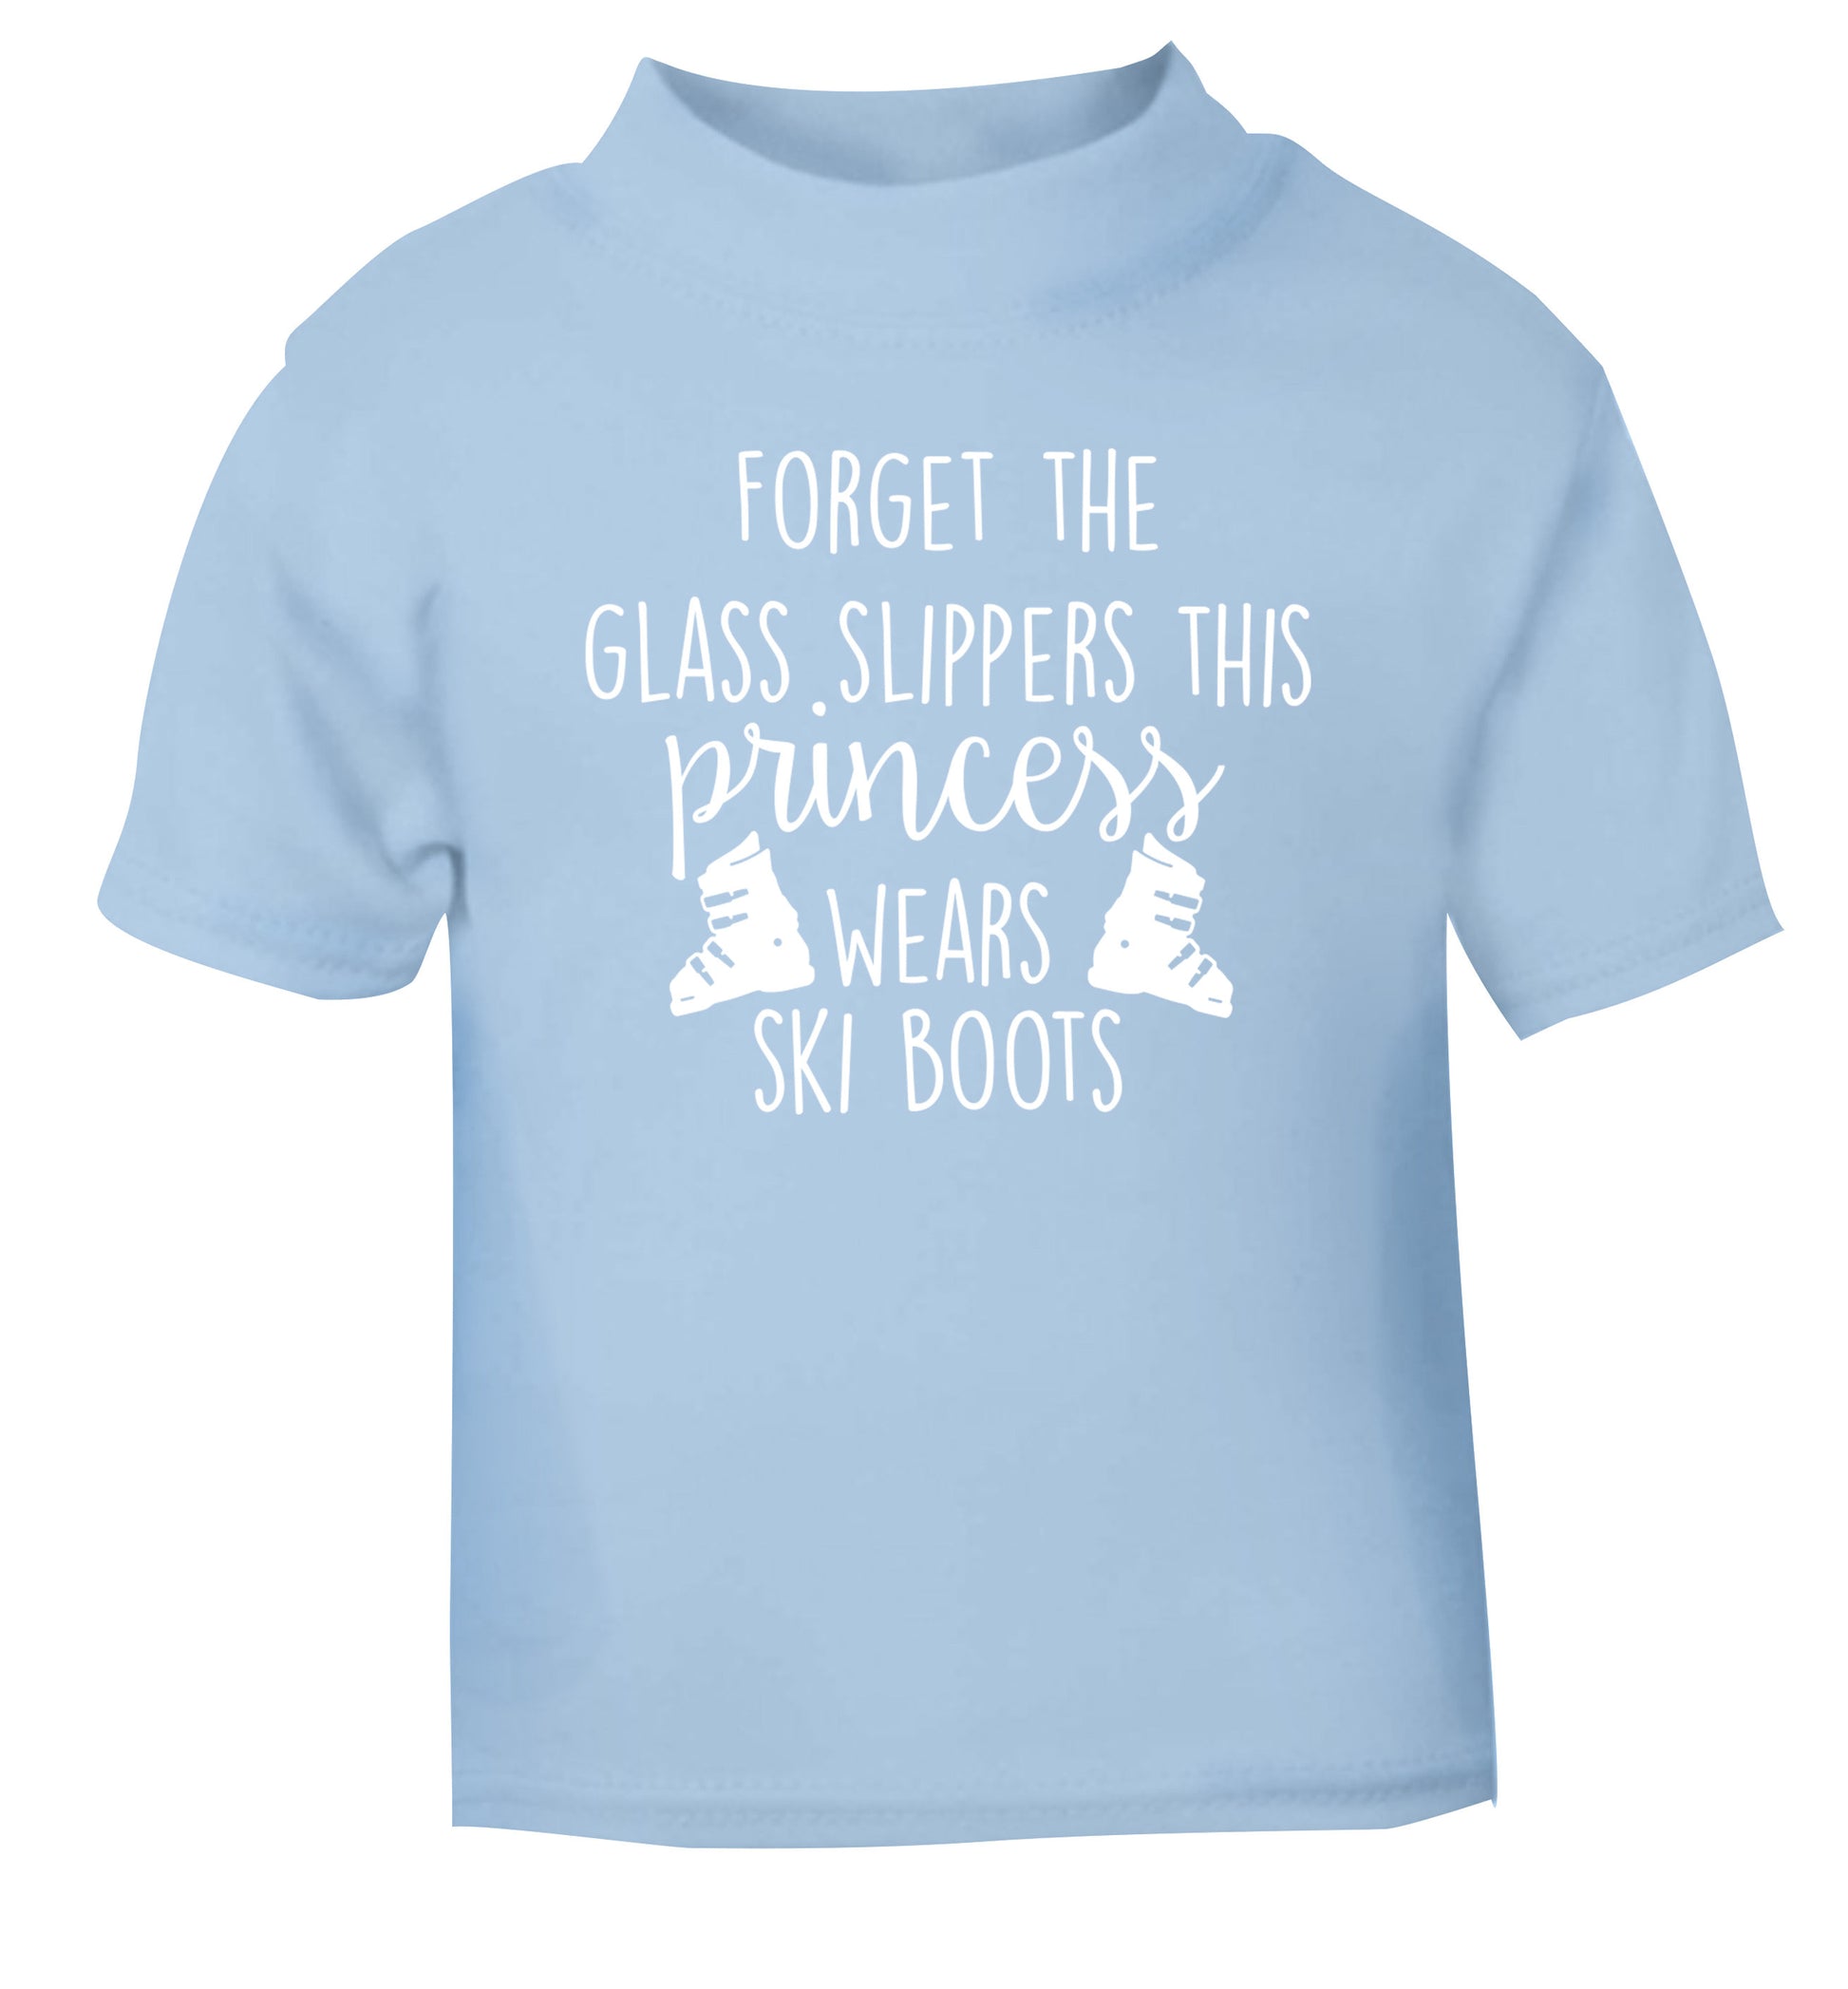 Forget the glass slippers this princess wears ski boots light blue Baby Toddler Tshirt 2 Years